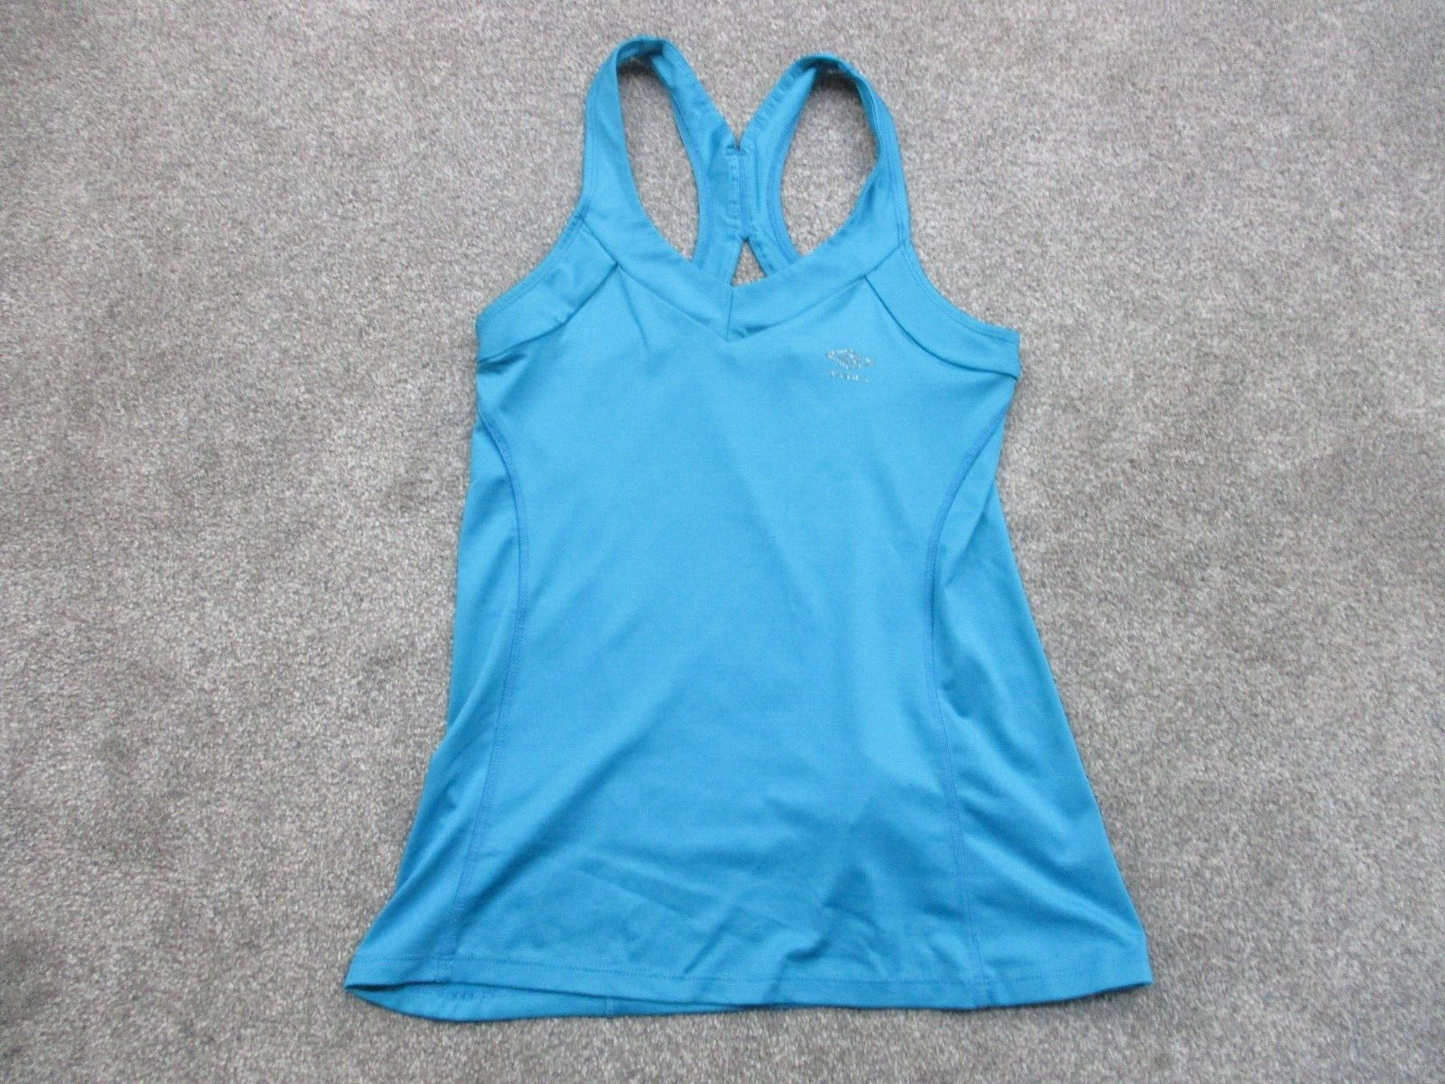 Umbro Tank Top Womens Size Small Blue Athletic Top Sleeveless V-Neck Solid